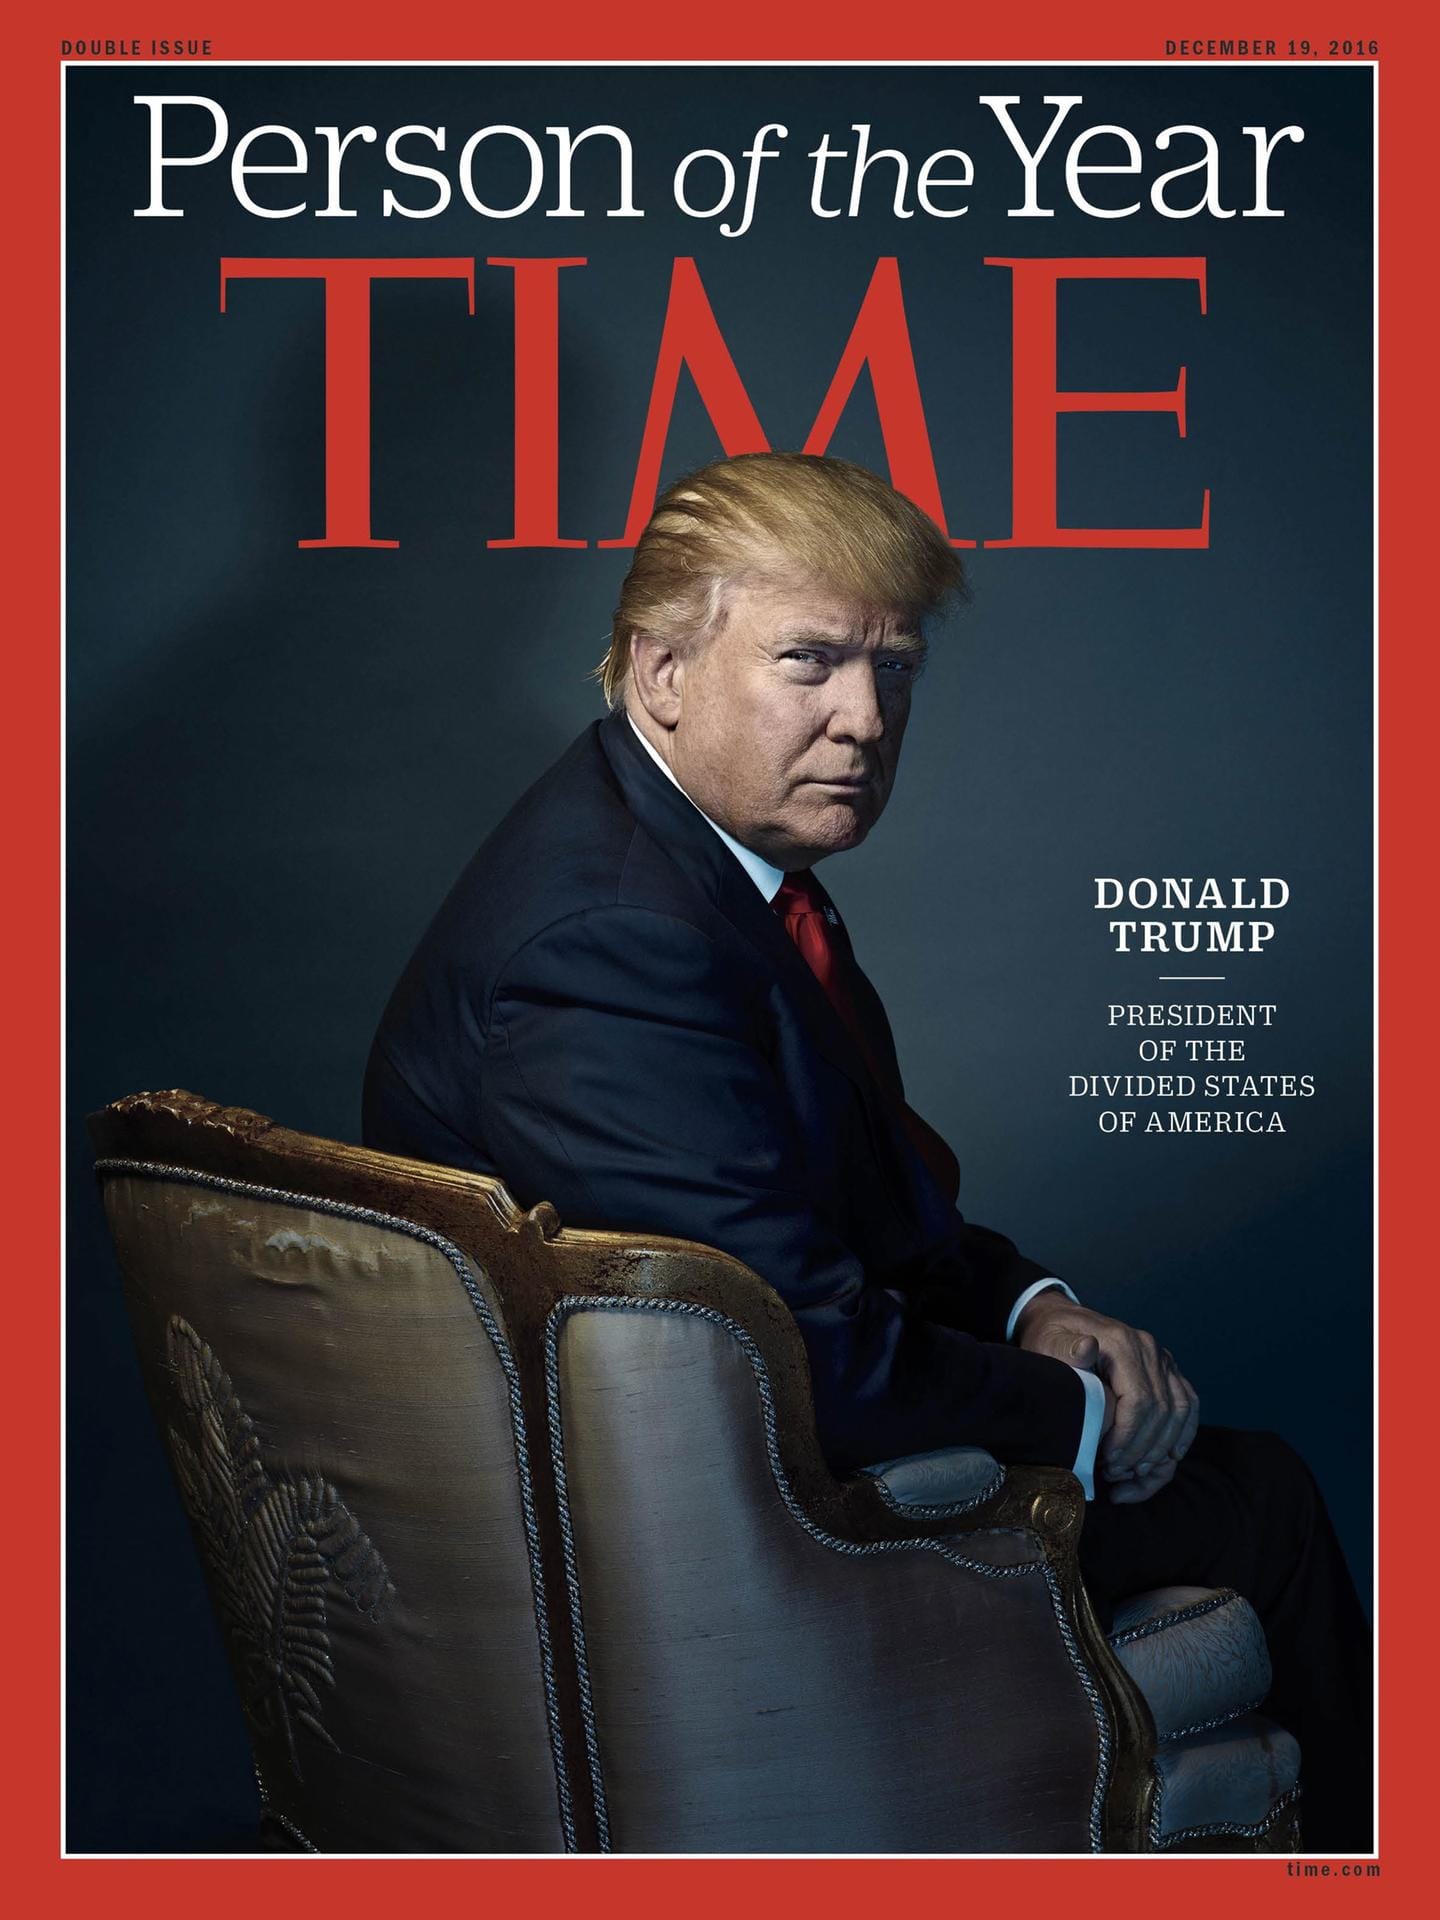 "Time" Person of the Year 2016